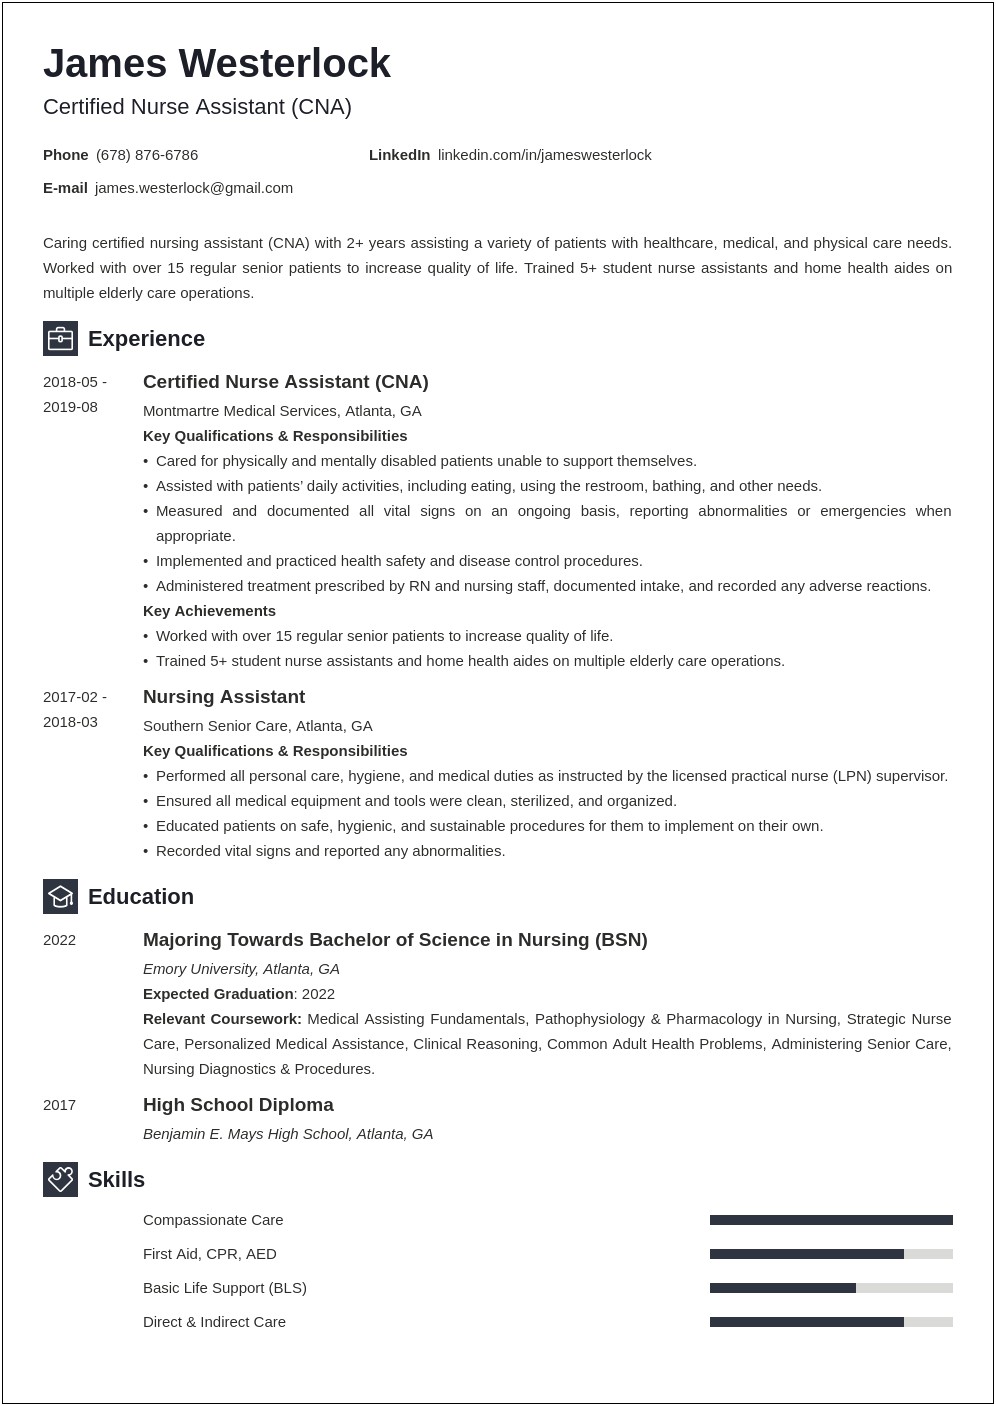 Nursing Assistant Resume Skills And Abilities